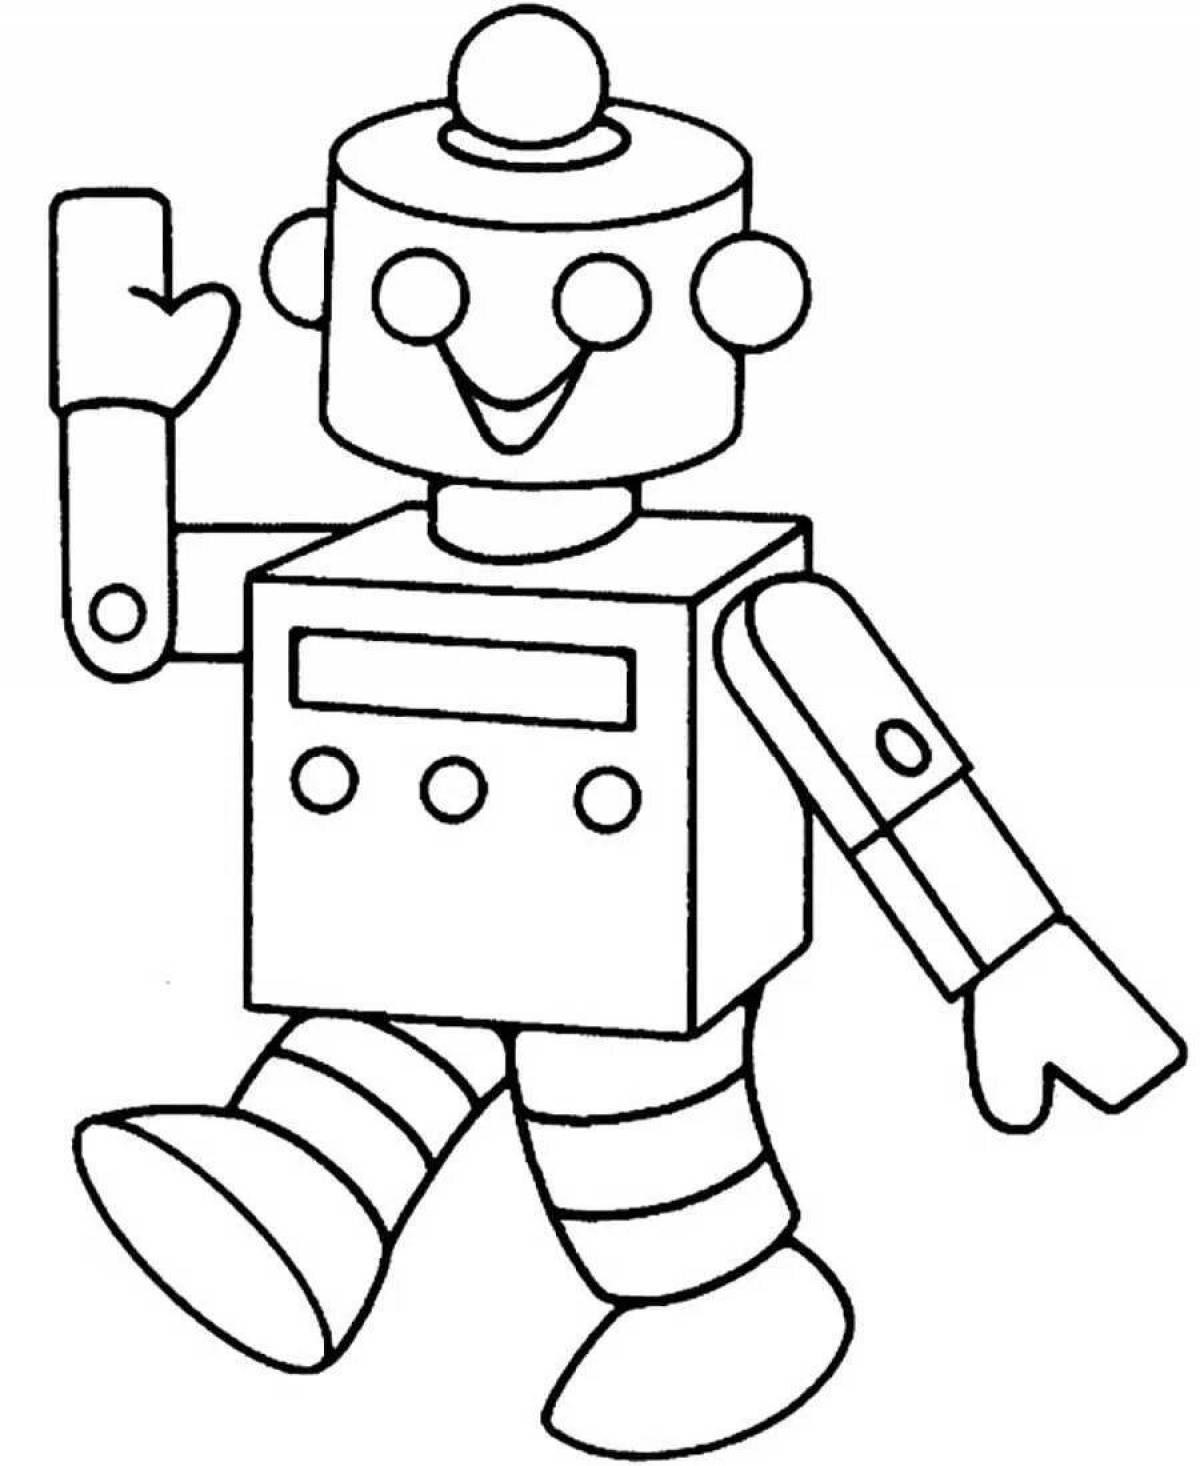 Coloring book funny printed robot